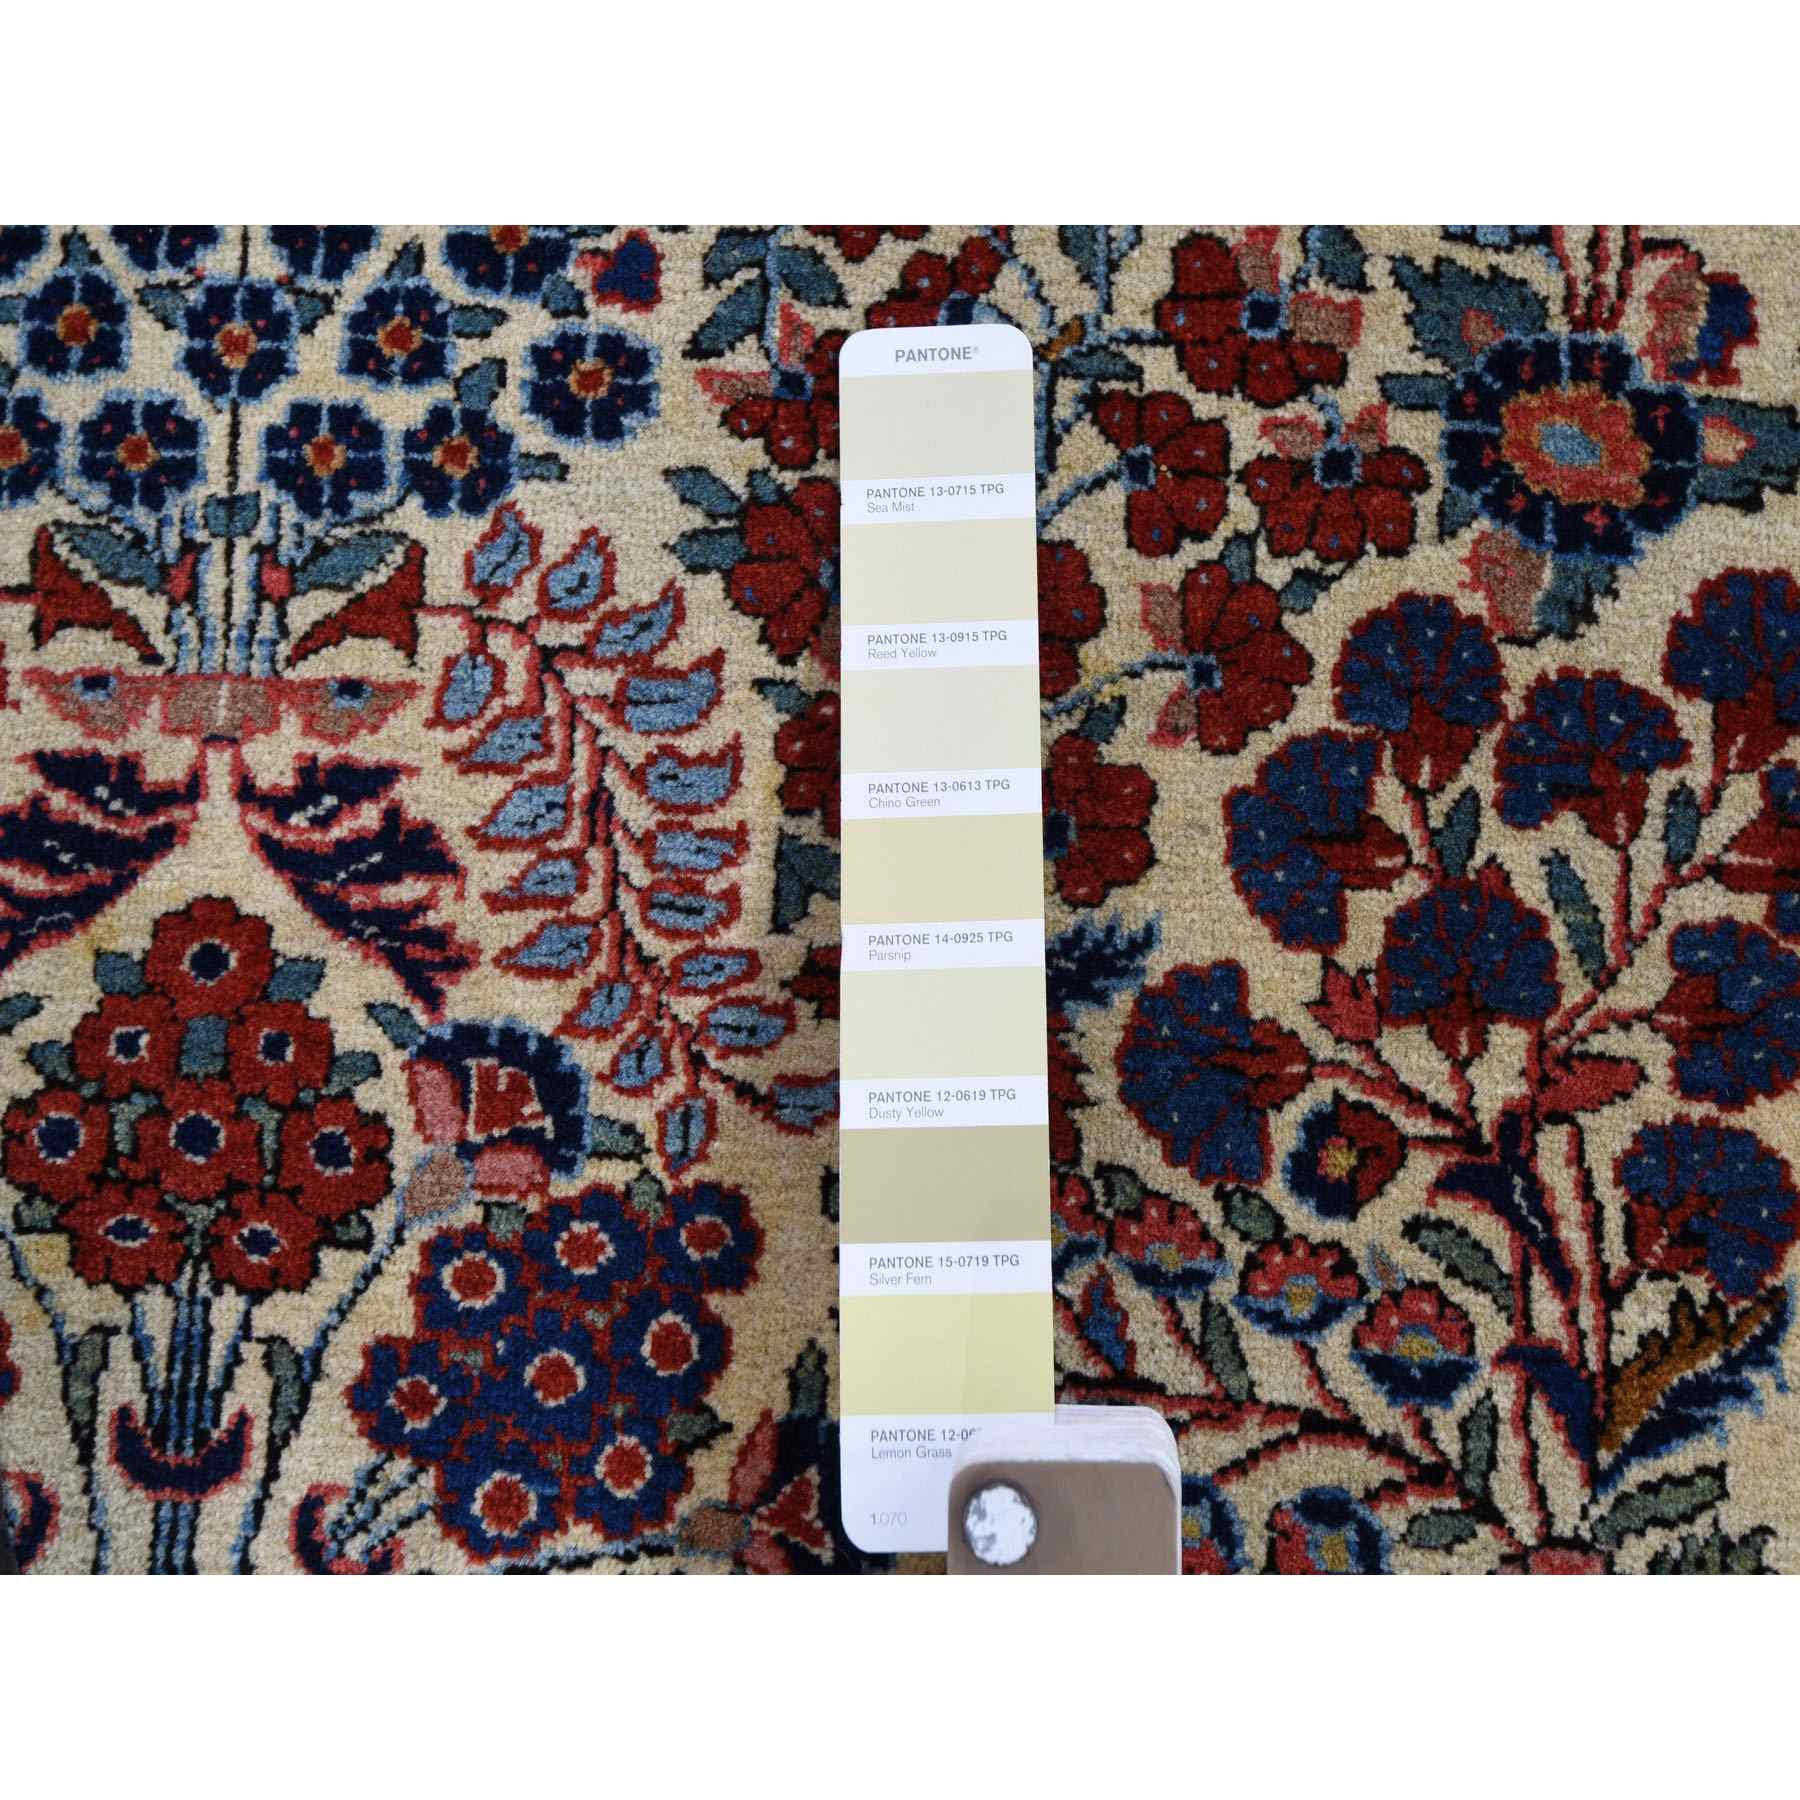 Antique-Hand-Knotted-Rug-243490